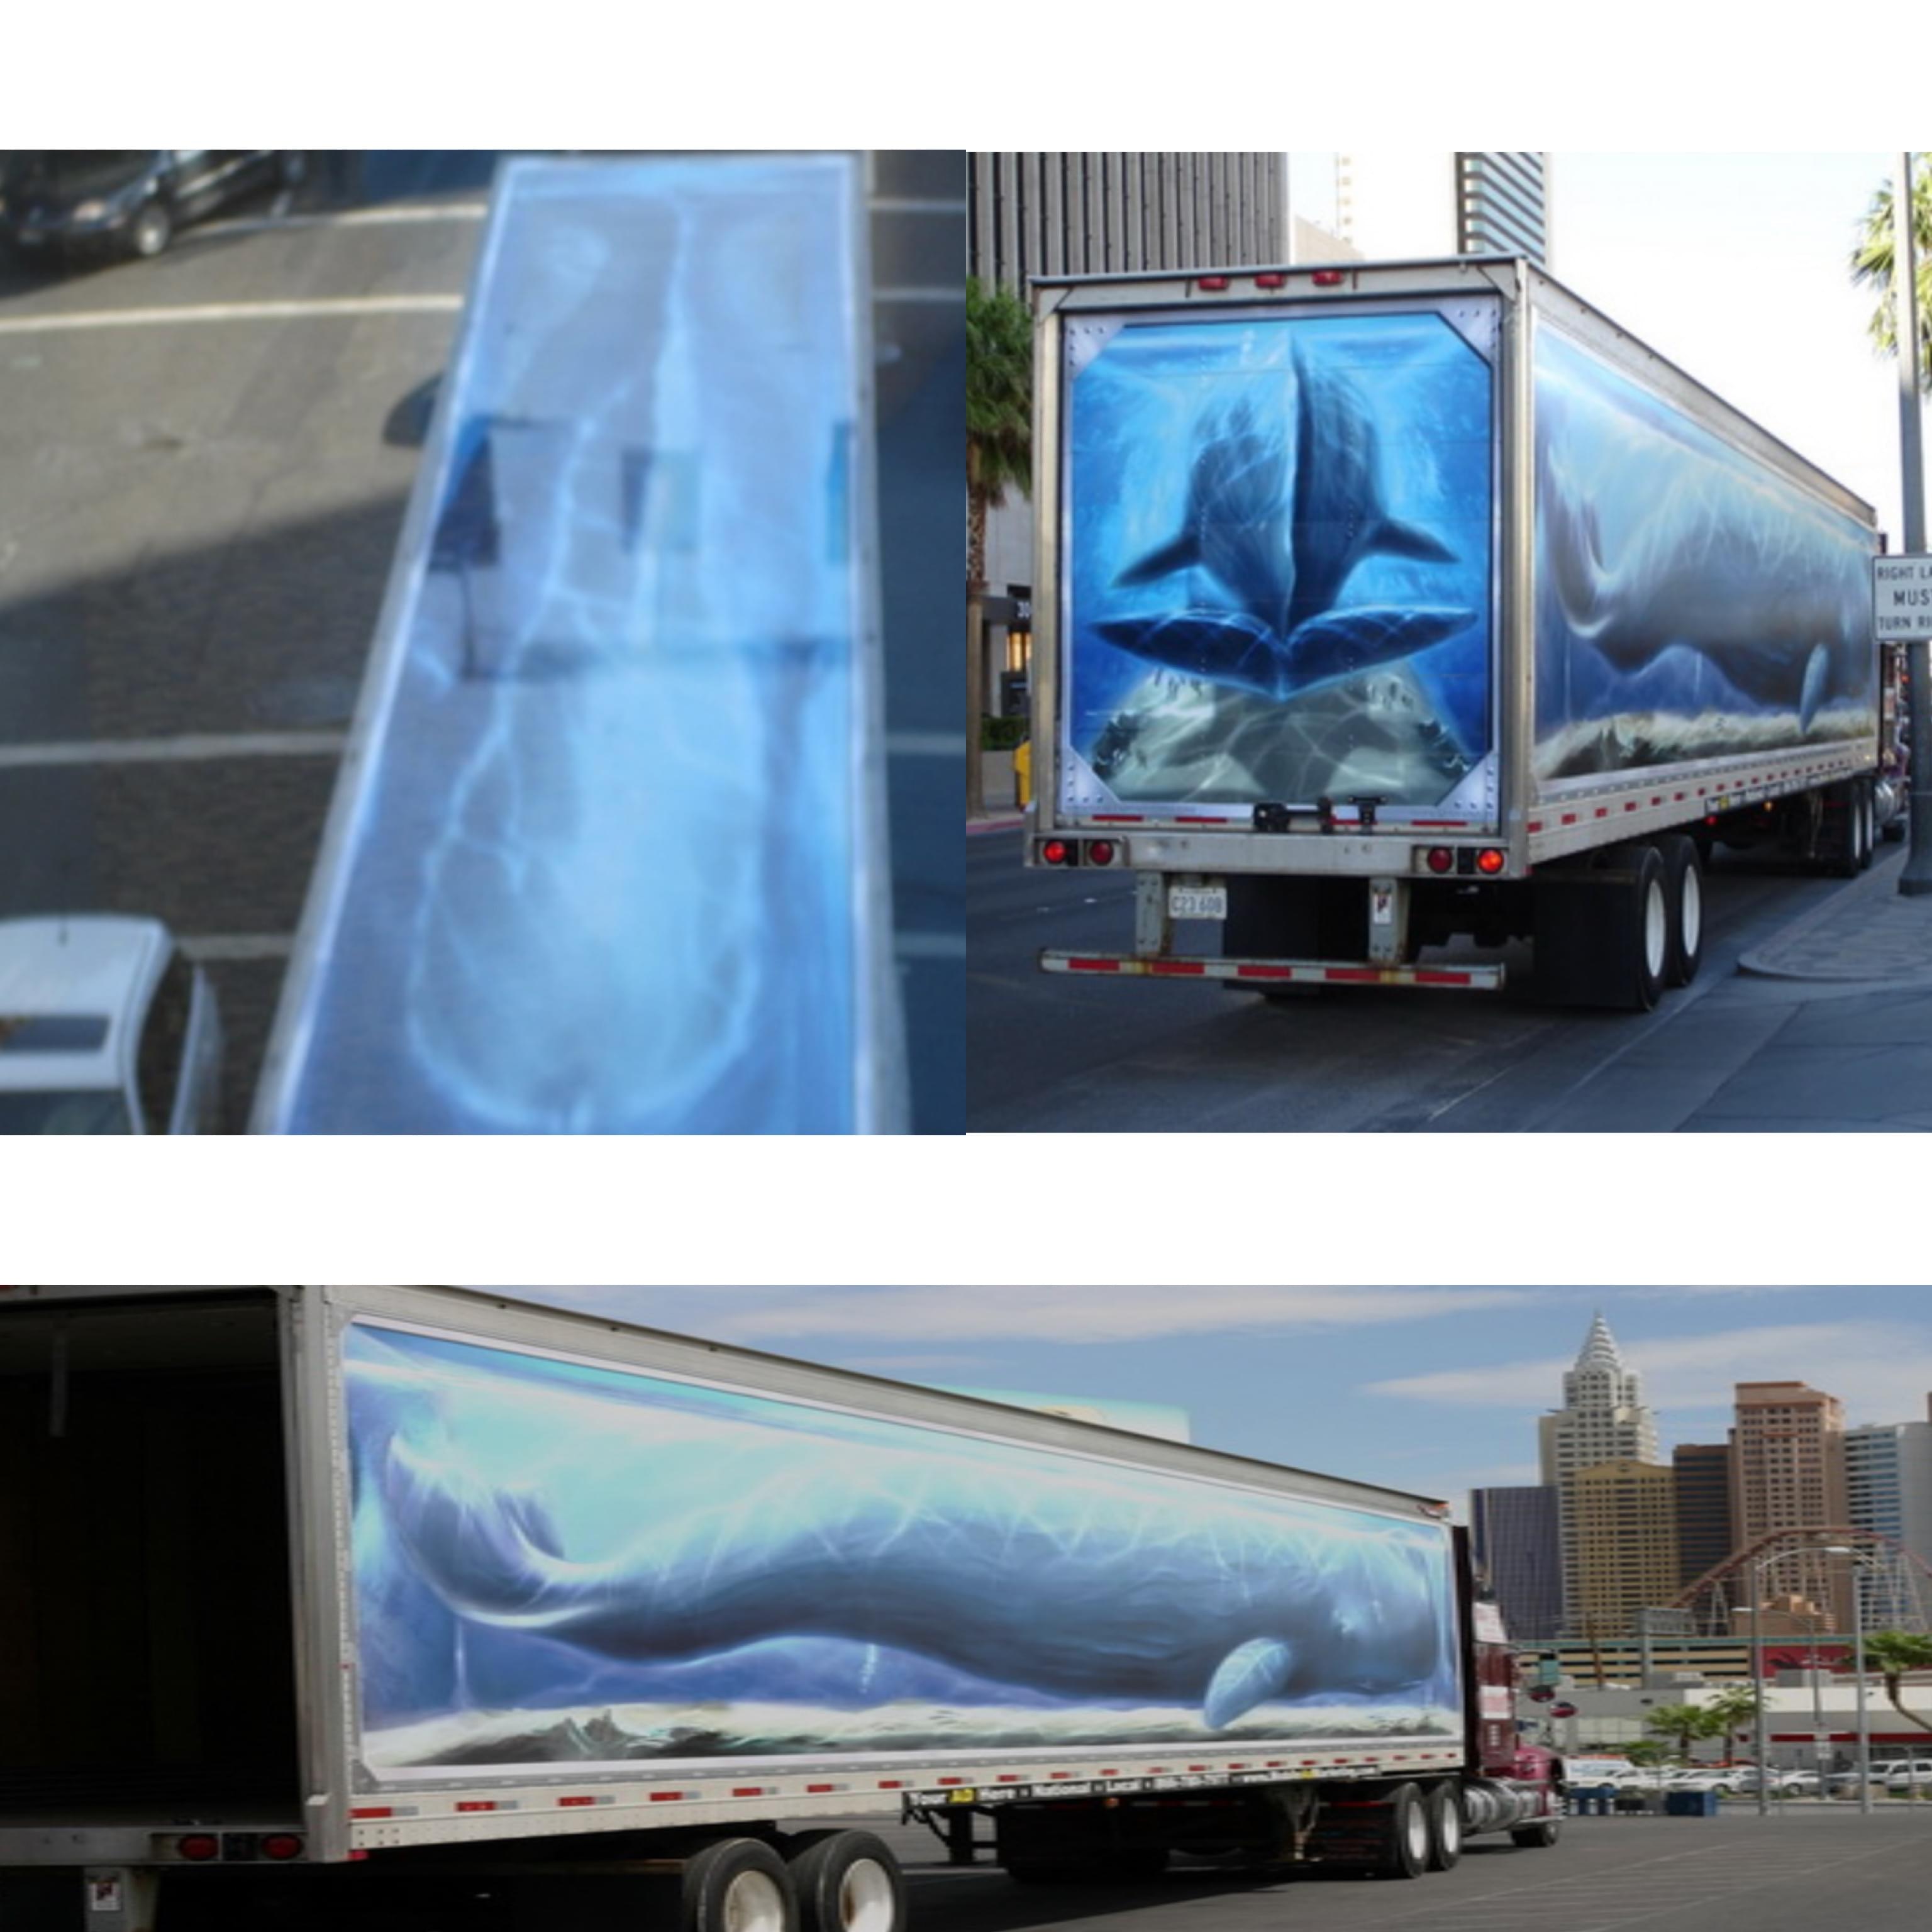 This ambient mobile billboard uses 3D ocean whale footage to create a tank-like appearance and underwater vibe